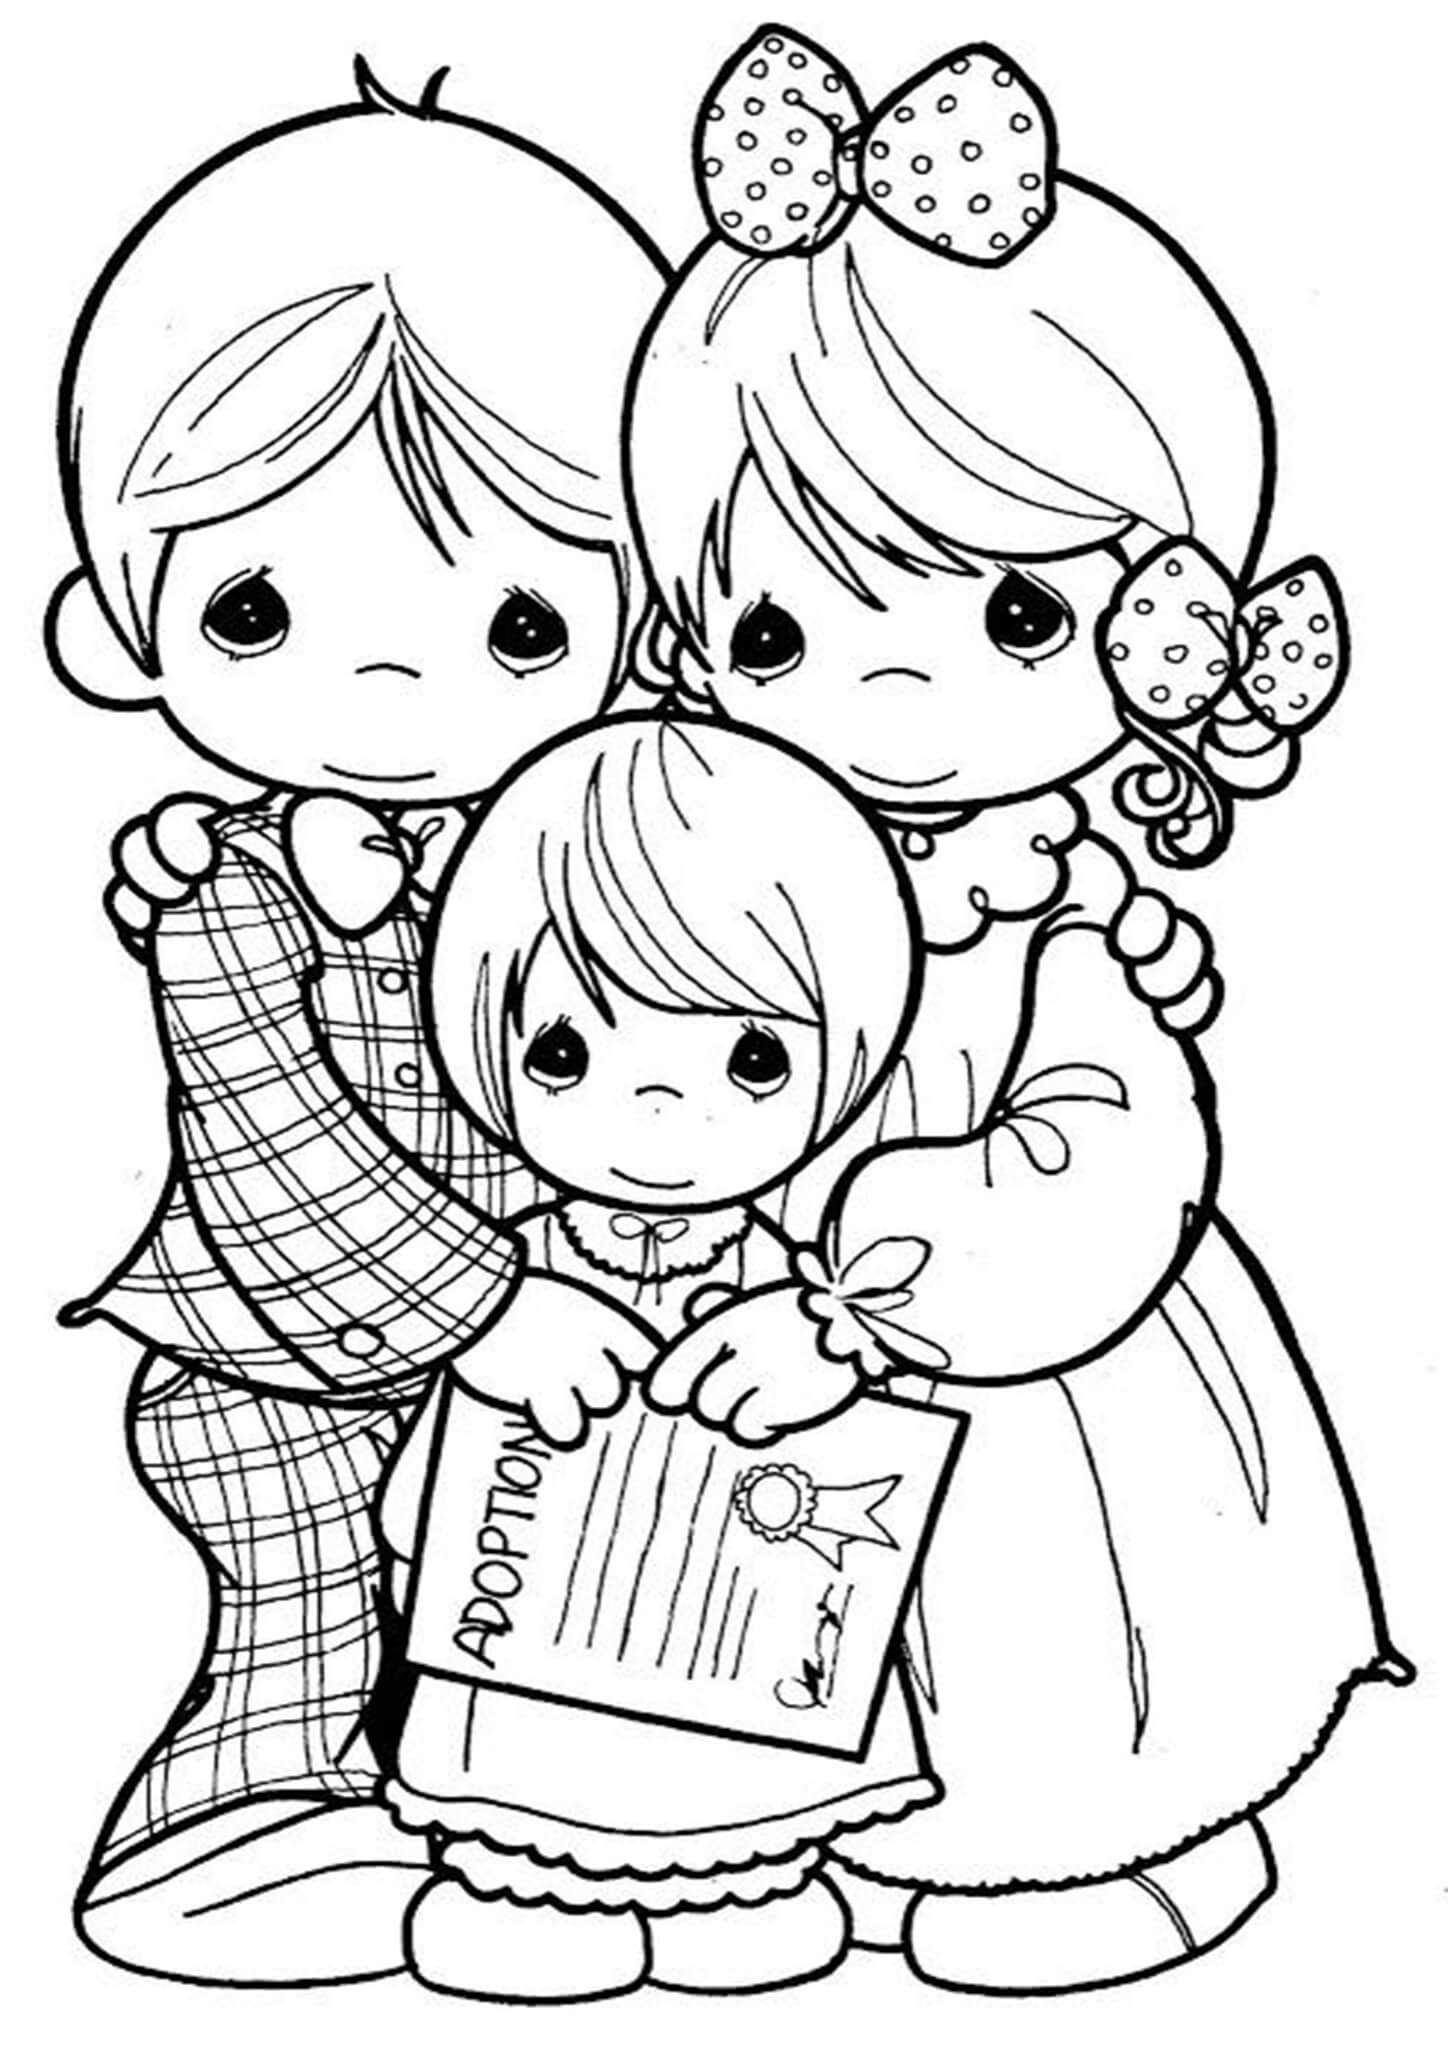 Free easy to print precious moments coloring pages precious moments coloring pages coloring books coloring pages